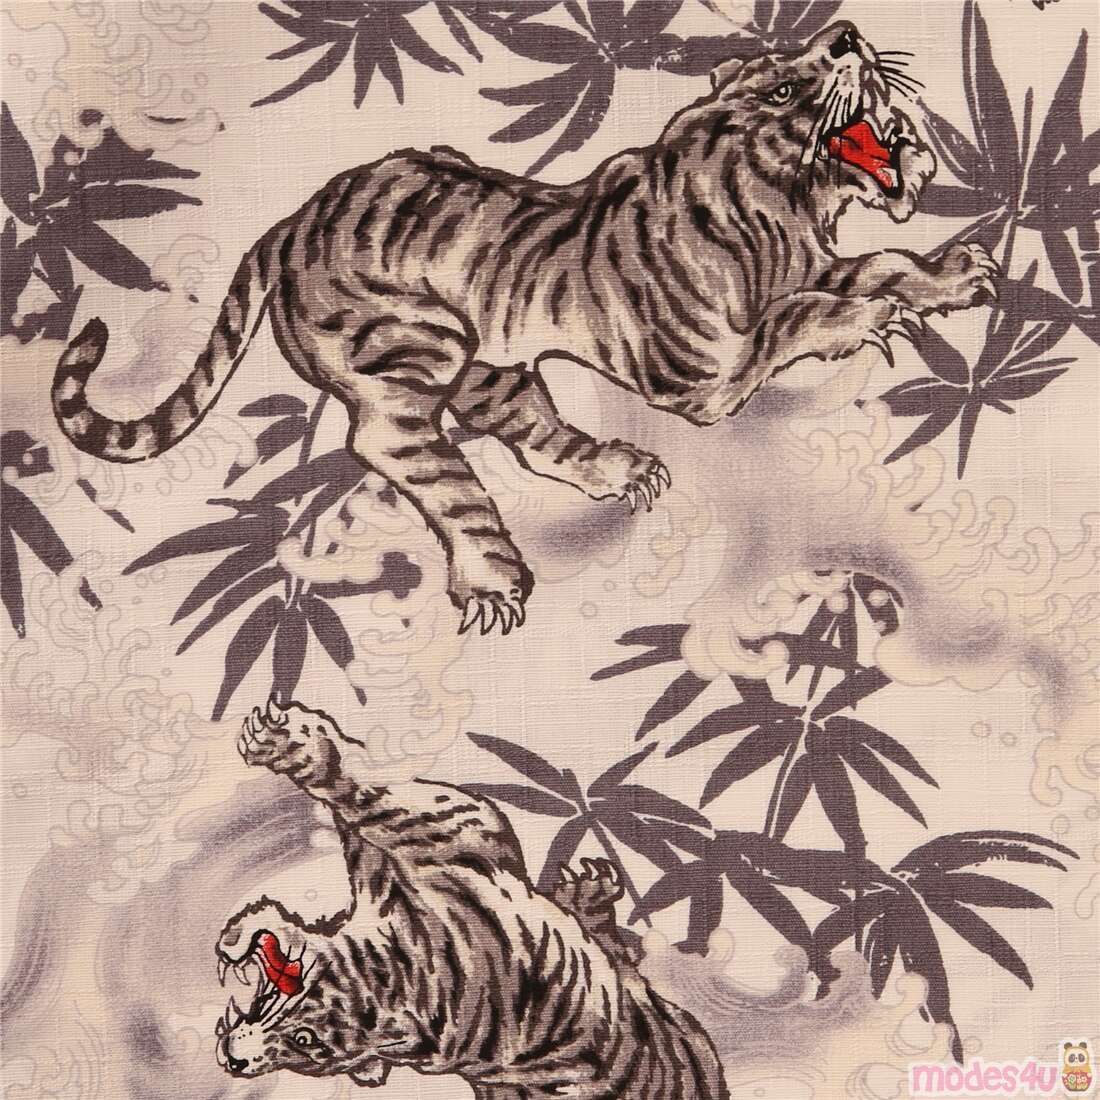 Tropical jungle dobby fabric from Japan with mist grey taupe tigers ...